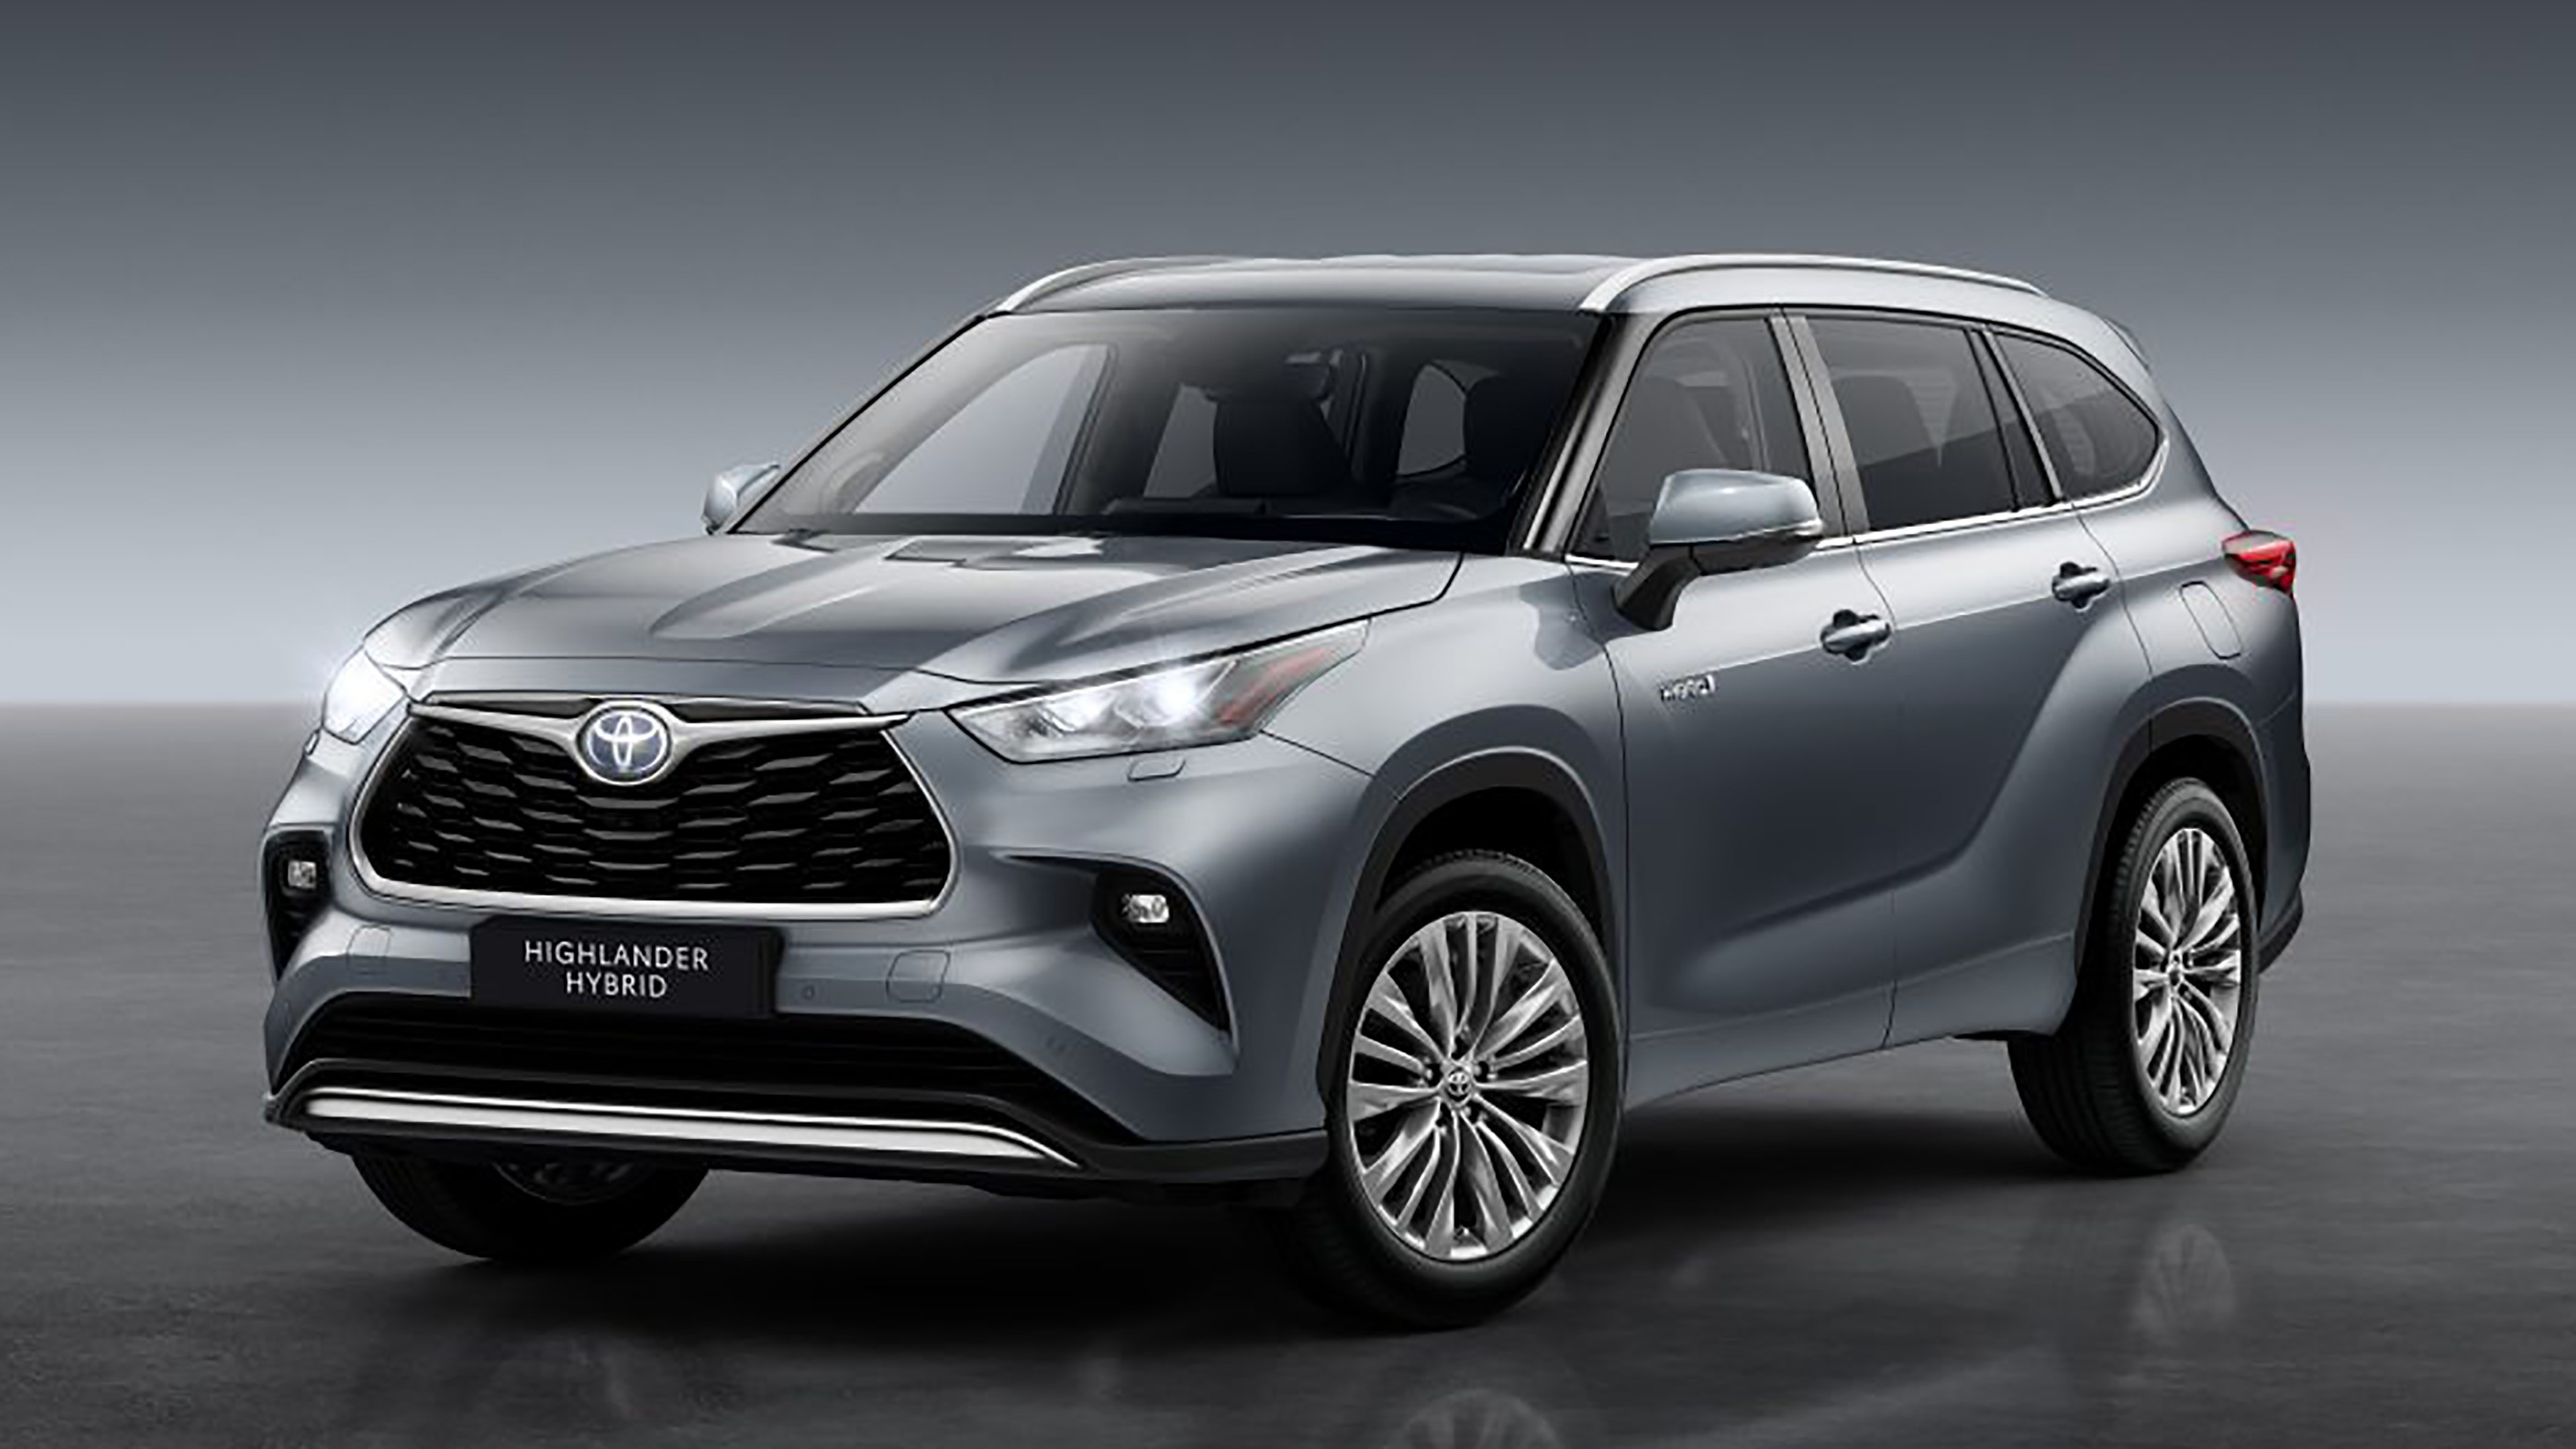 New seven-seat Toyota Highlander SUV coming to the UK in 2021 | Auto